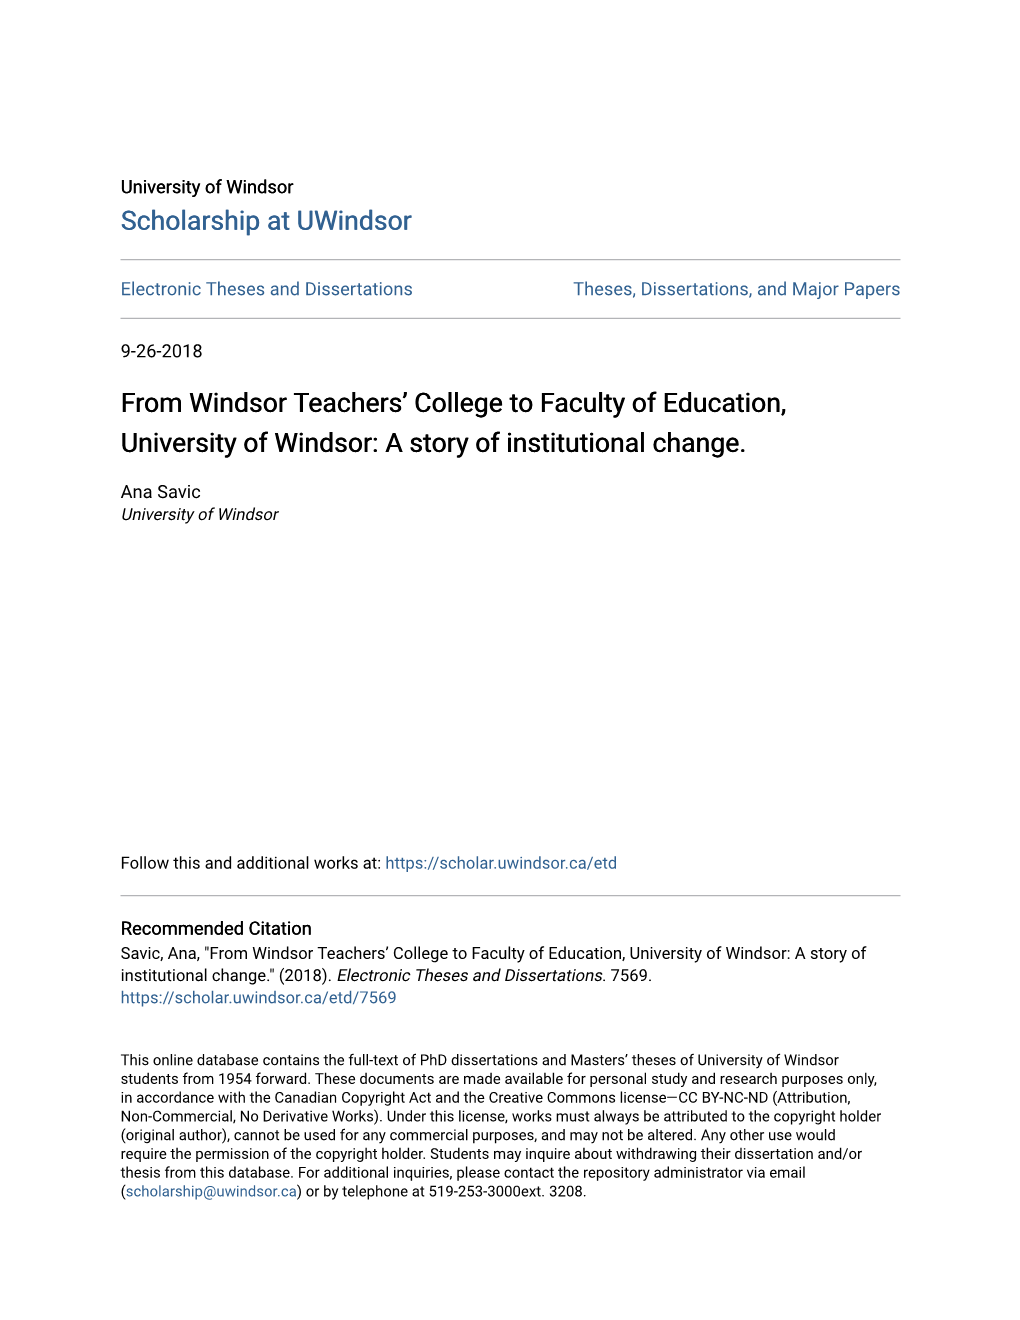 From Windsor Teachers' College to Faculty of Education, University Of